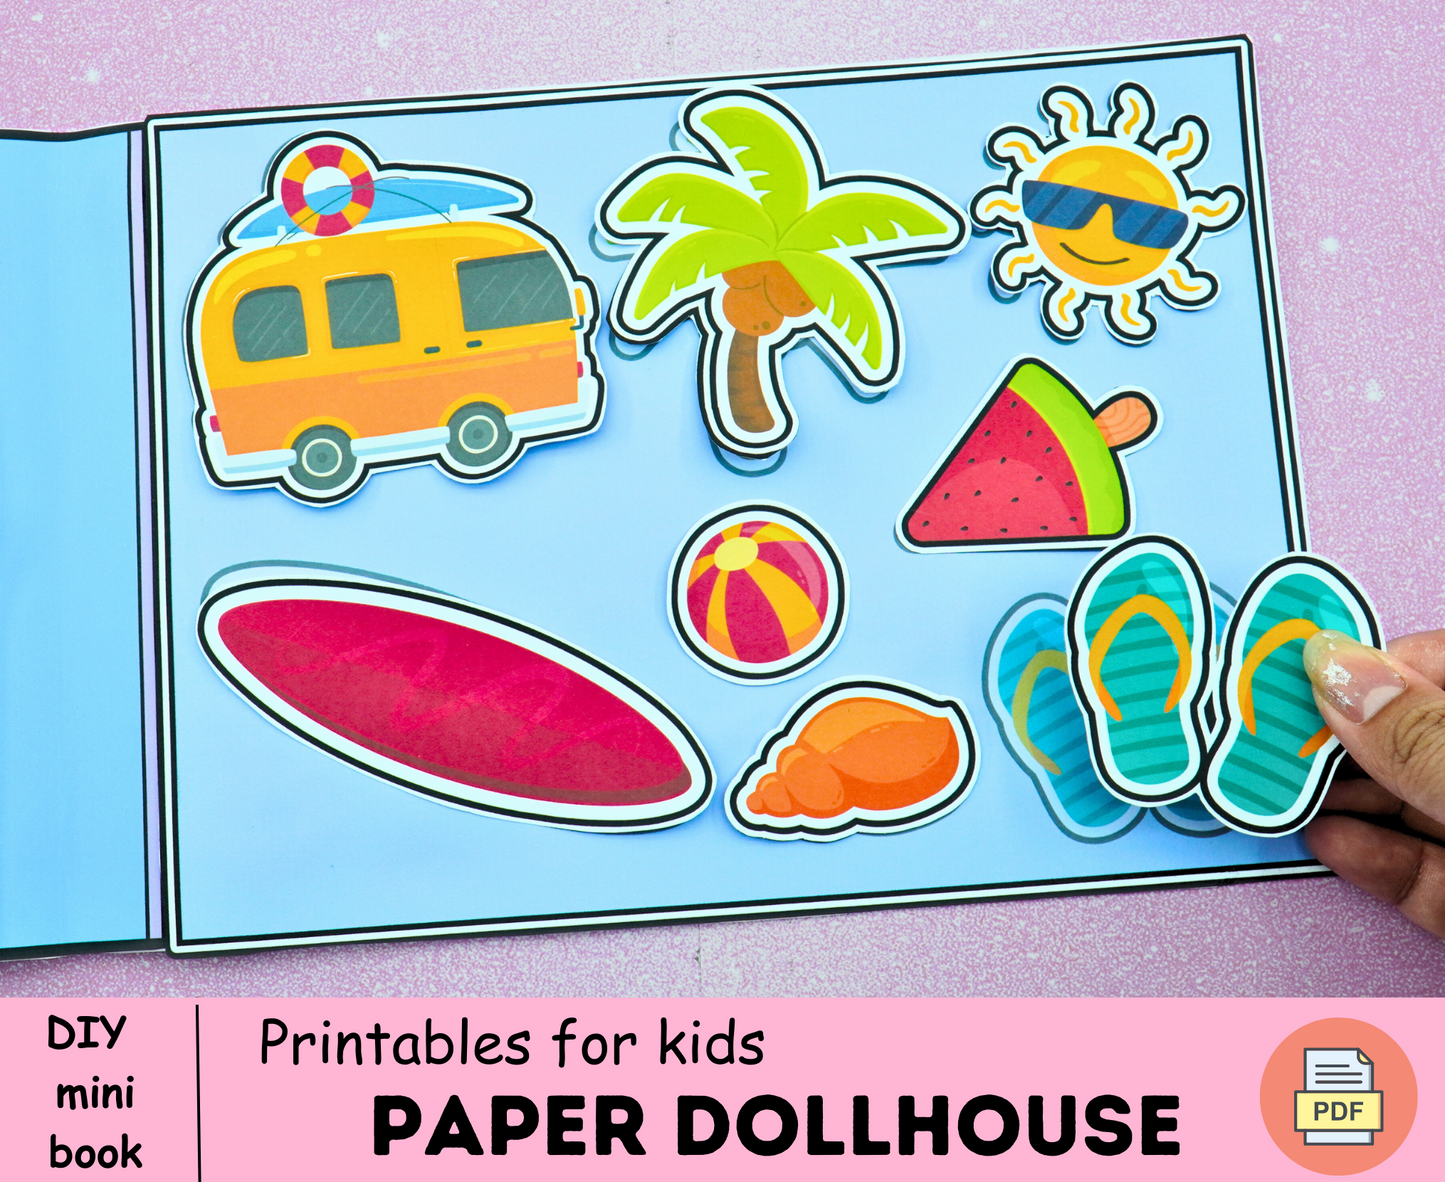 Summer Busy Book Printable version 2.0 | Homeschool Busy Book For Kids | Seasons Quiet Book For Preschool 🌈 Woa Doll Crafts